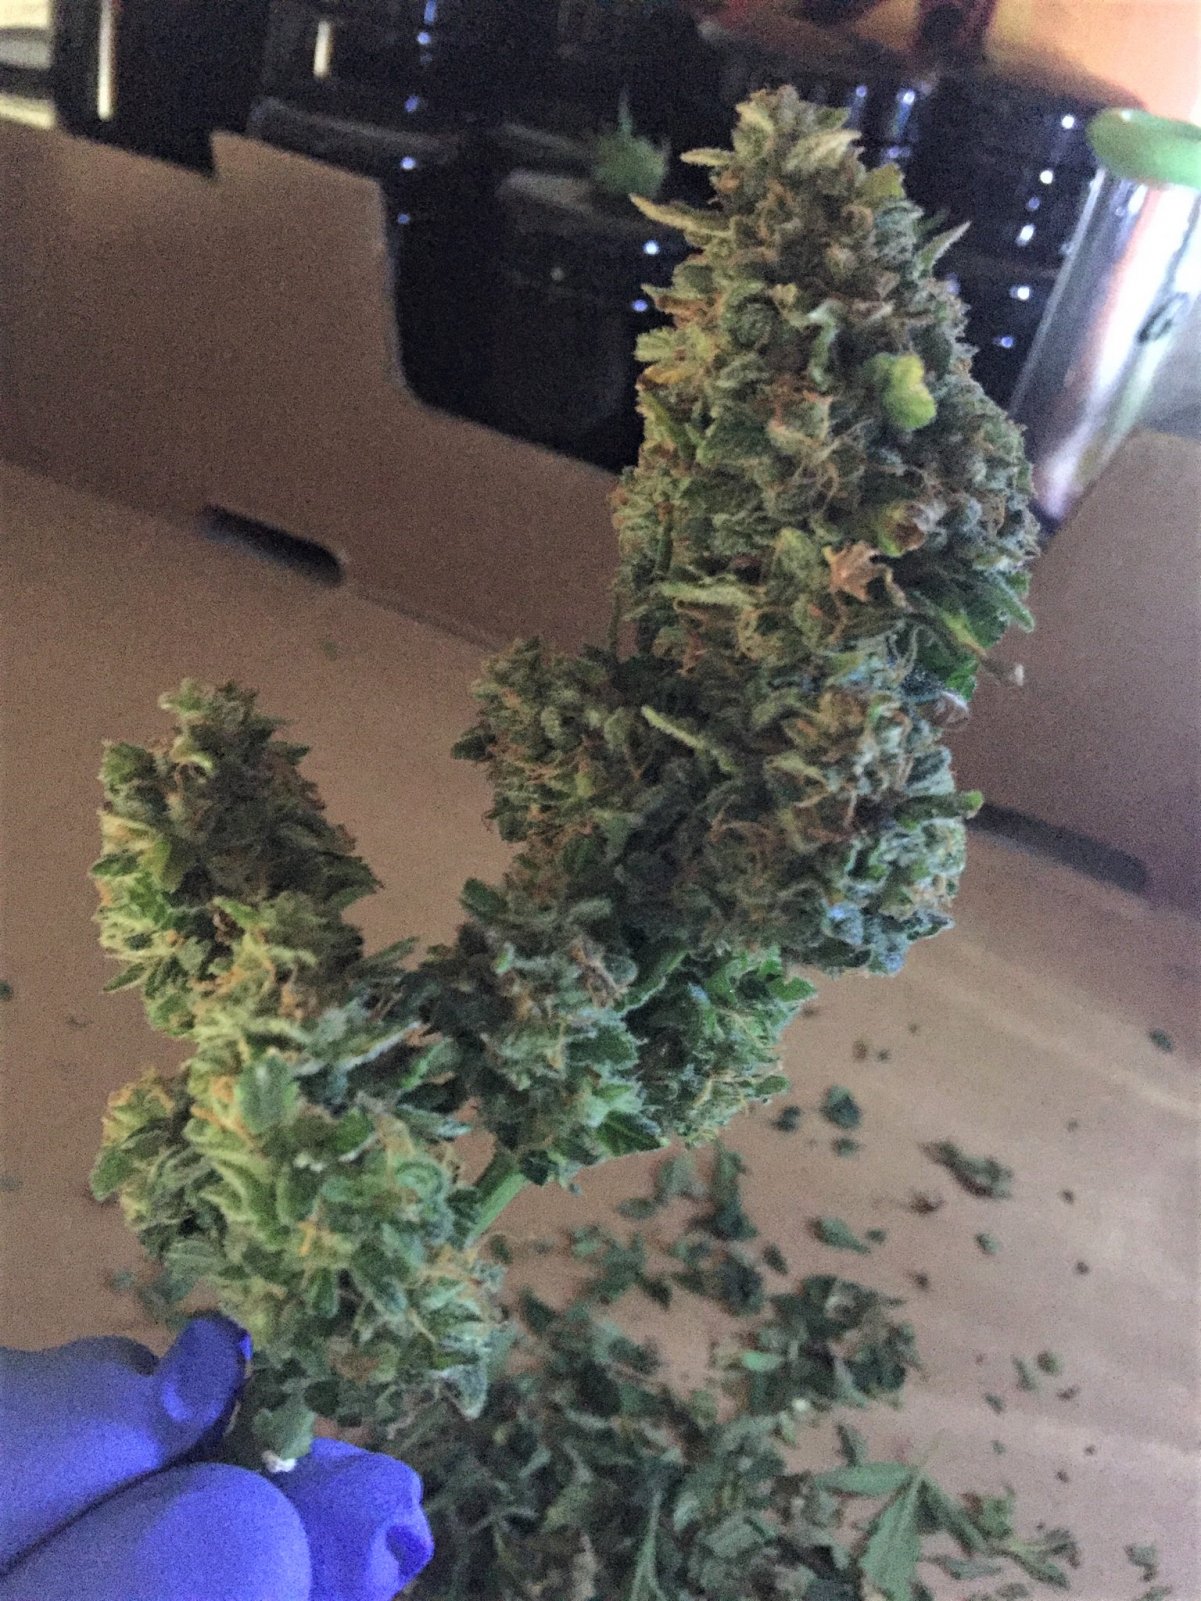 CJ3 harvested bud 3 wet trimmed for drying no flash picture.jpg